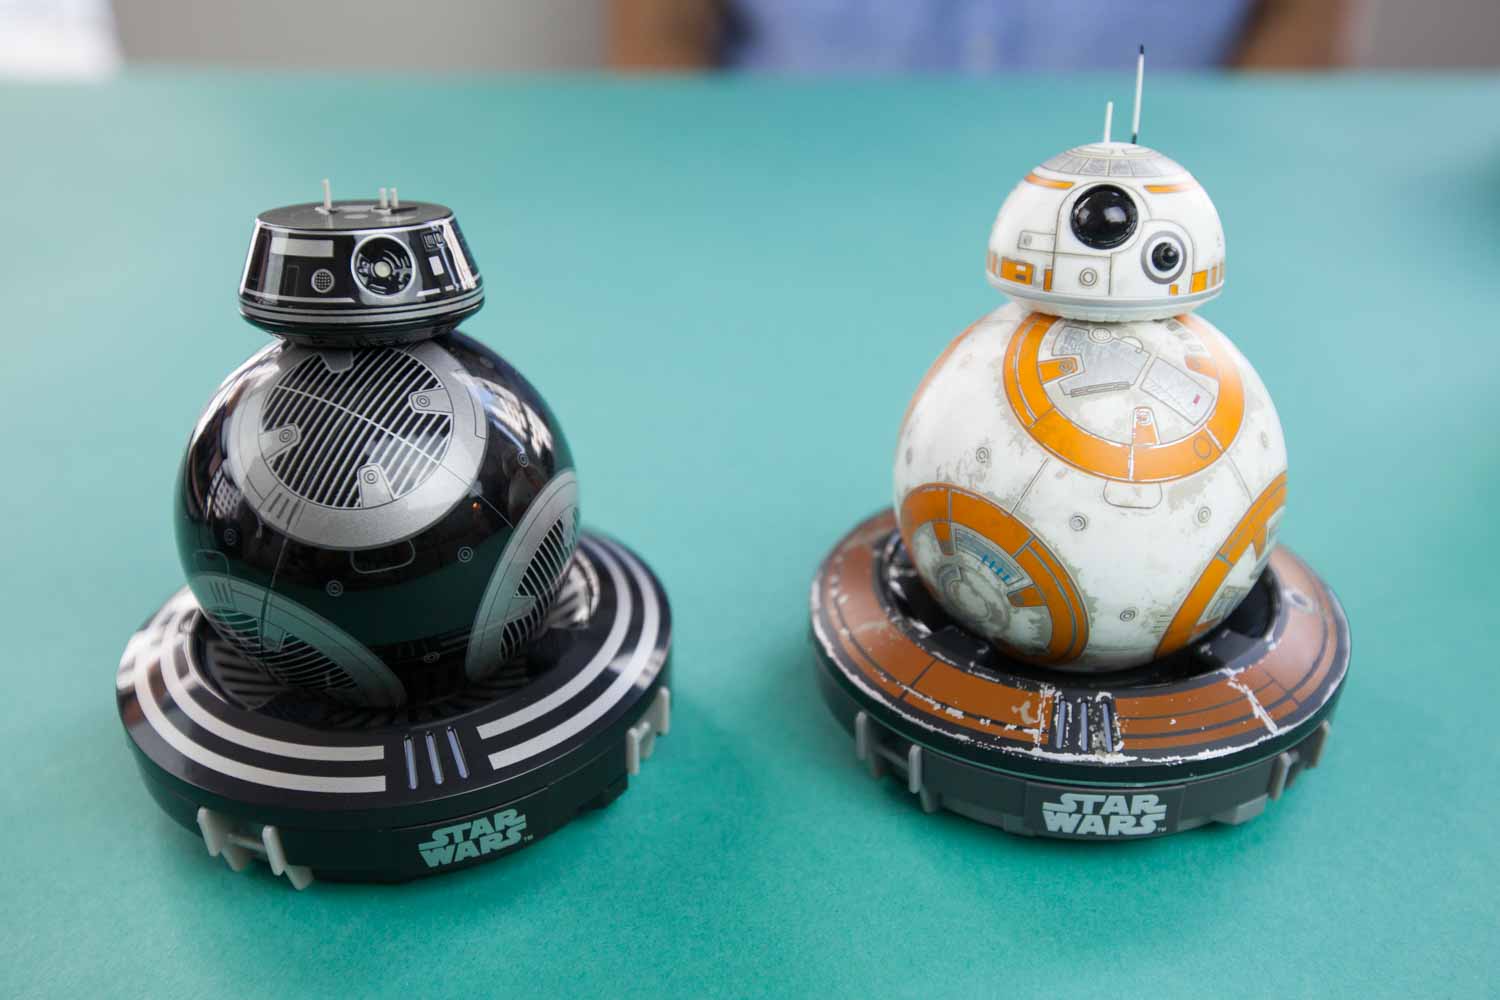 Sphero on the Engineering Behind their New Star Wars Products - Fictiv